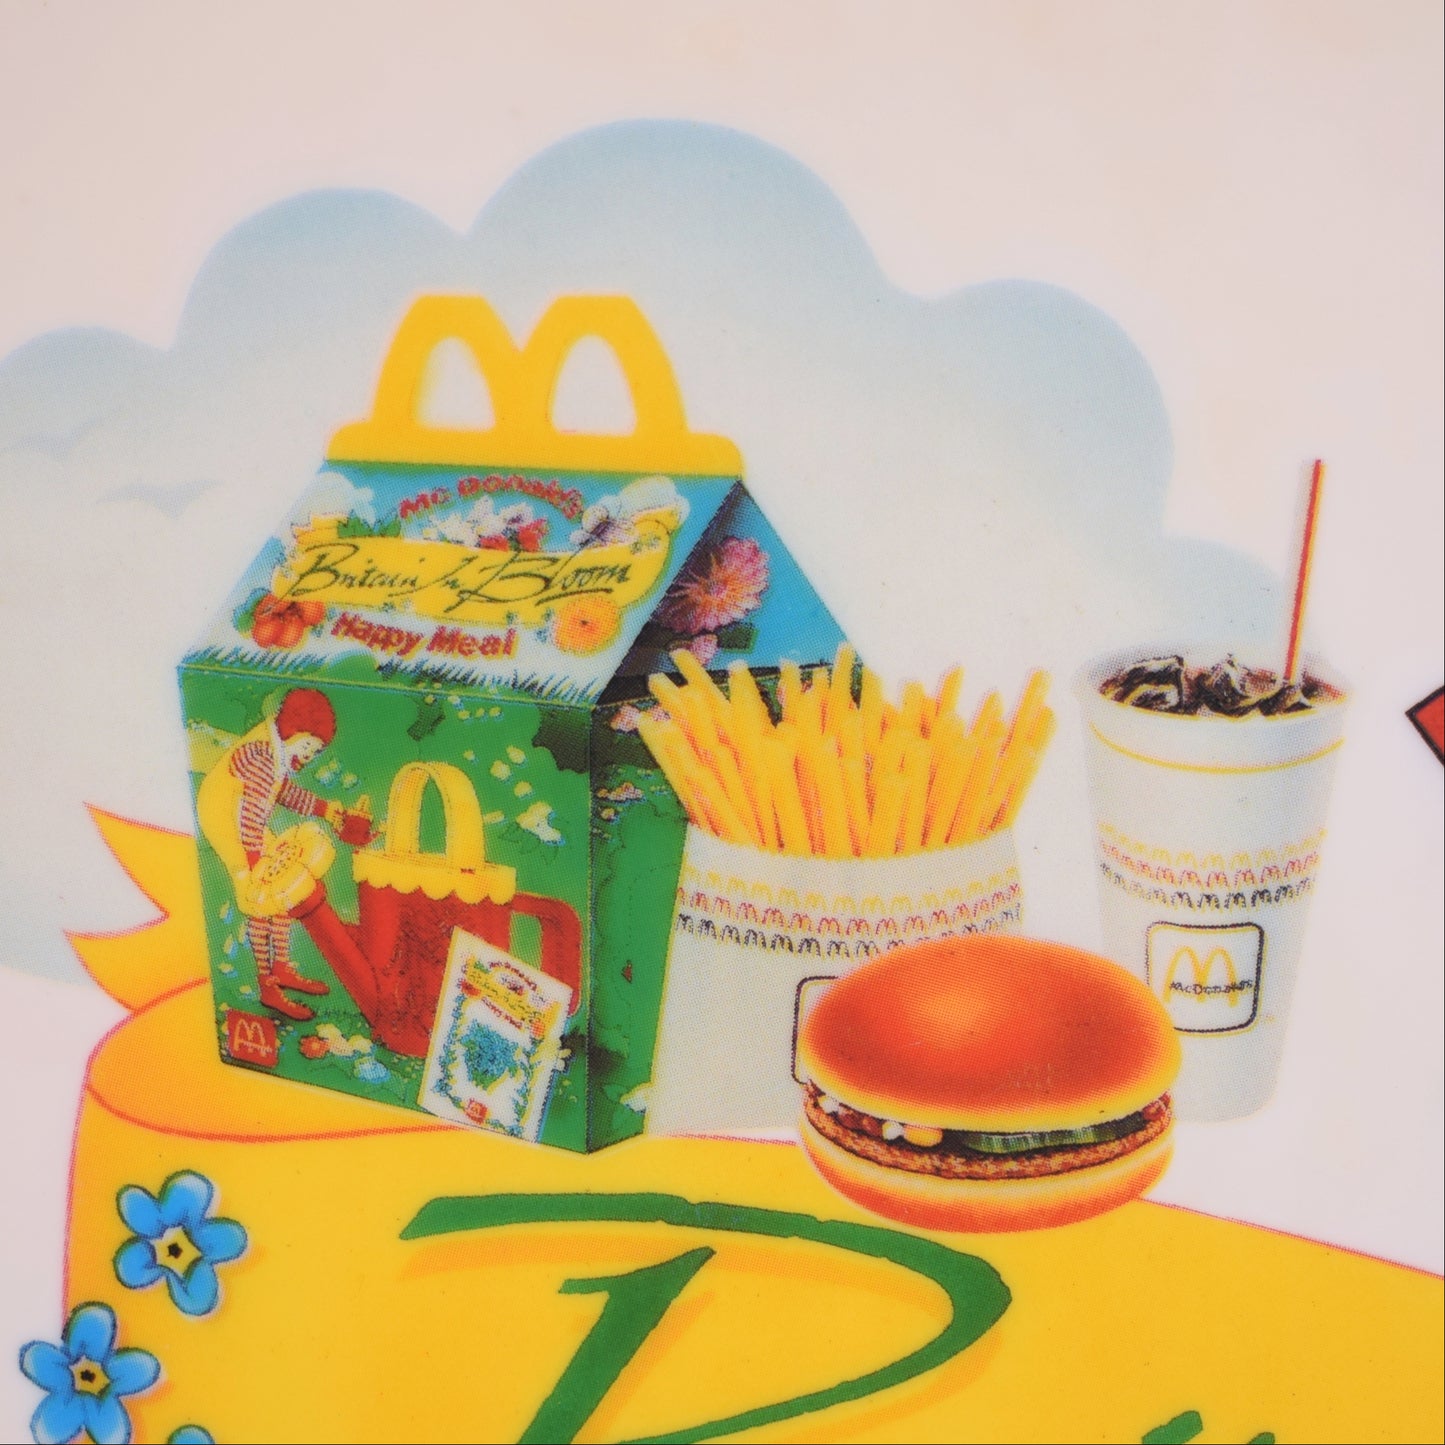 Vintage 1990s McDonald's Drive In Sign - Britain In Bloom